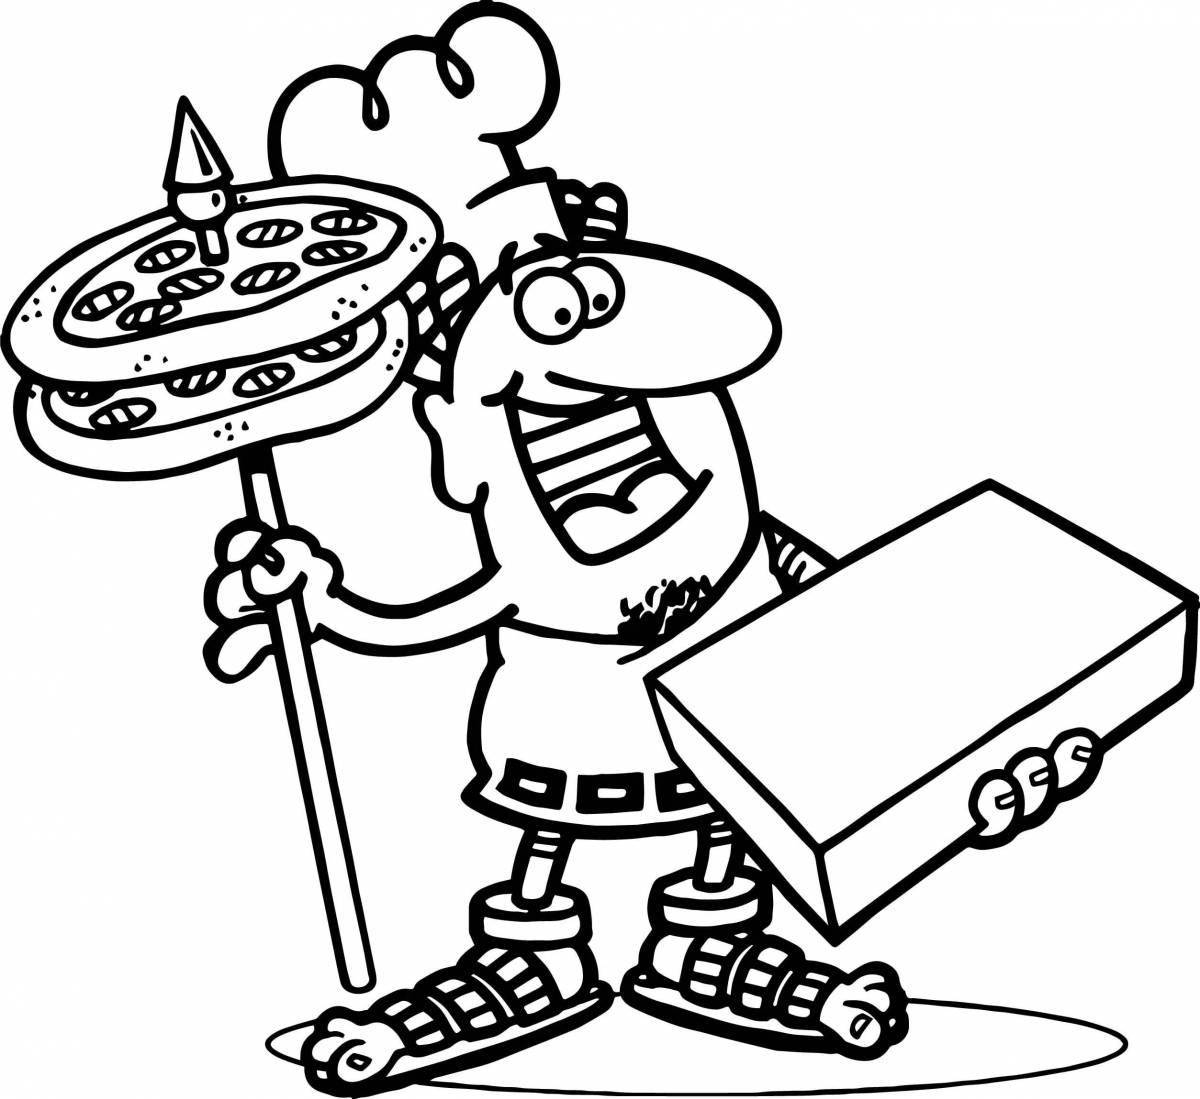 Coloring page happy pizzeria